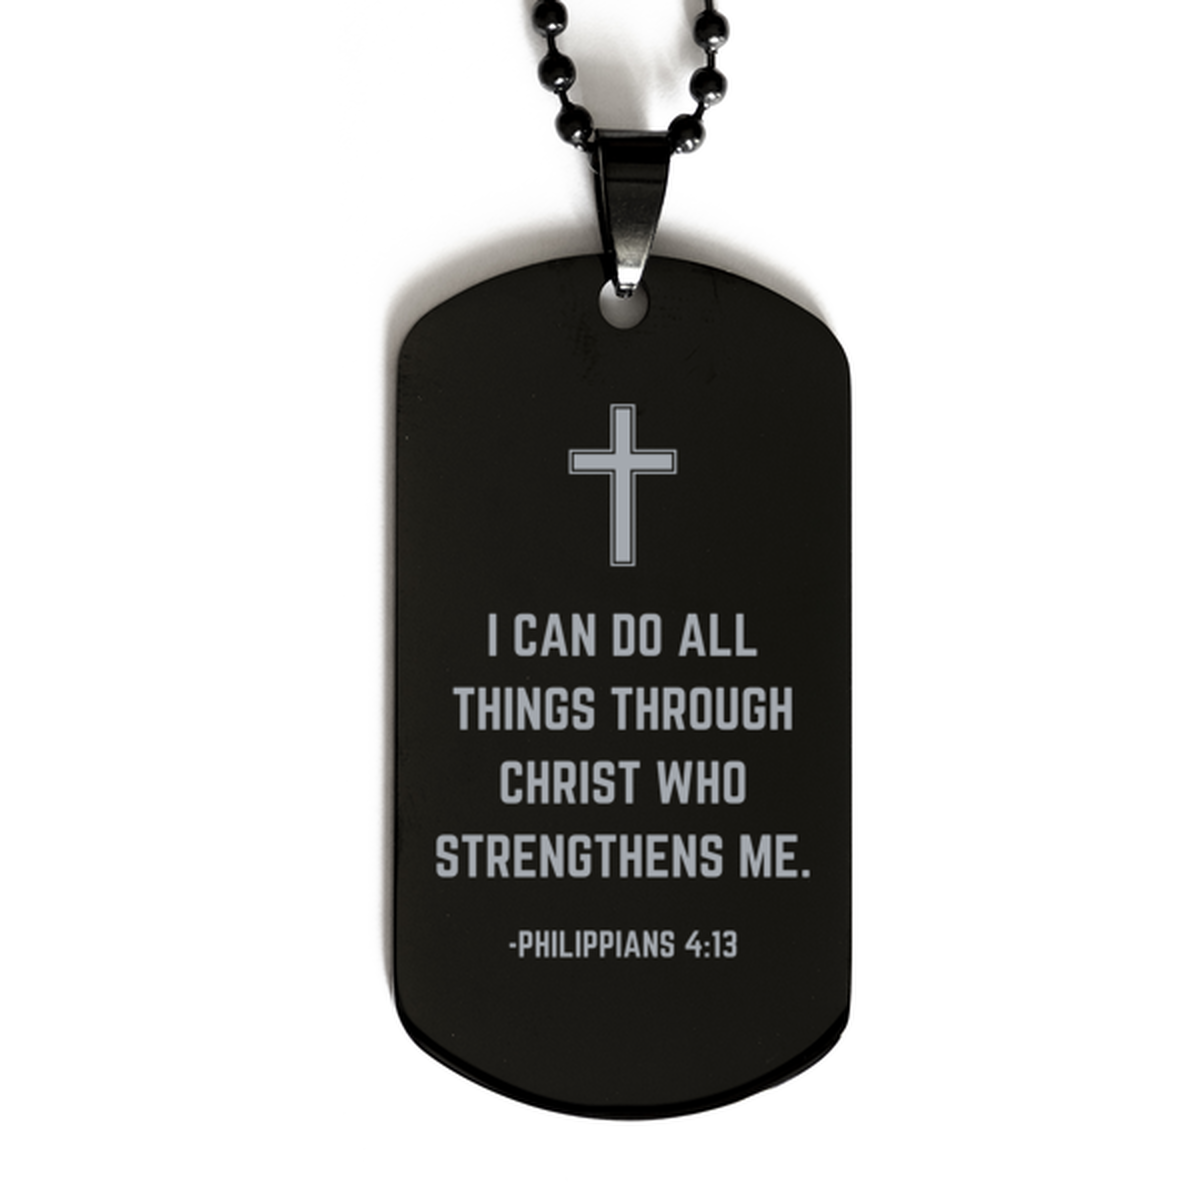 Baptism Gifts For Teenage Boys Girls, Christian Bible Verse Black Dog Tag, I can do all things through Christ, Confirmation Gifts, Bible Verse Necklace for Son, Godson, Grandson, Nephew